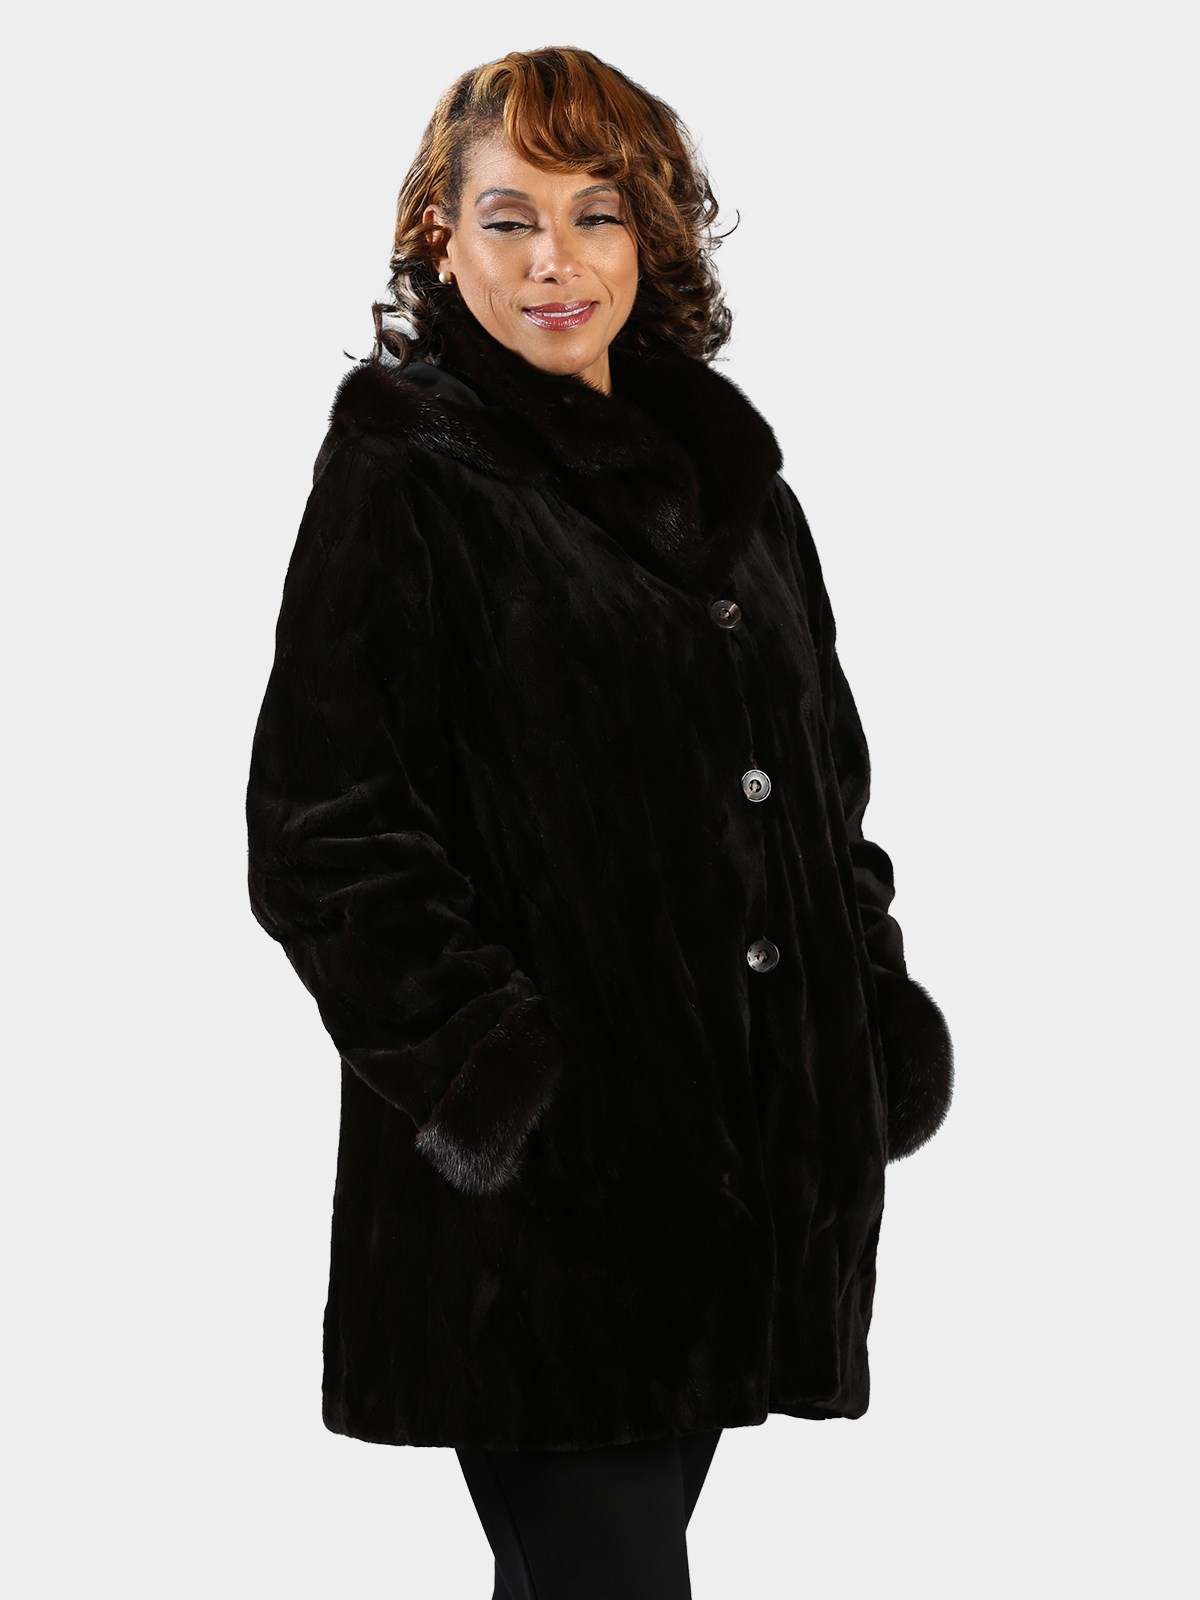 Women's Fur Jackets and Leather Jackets | Estate Furs